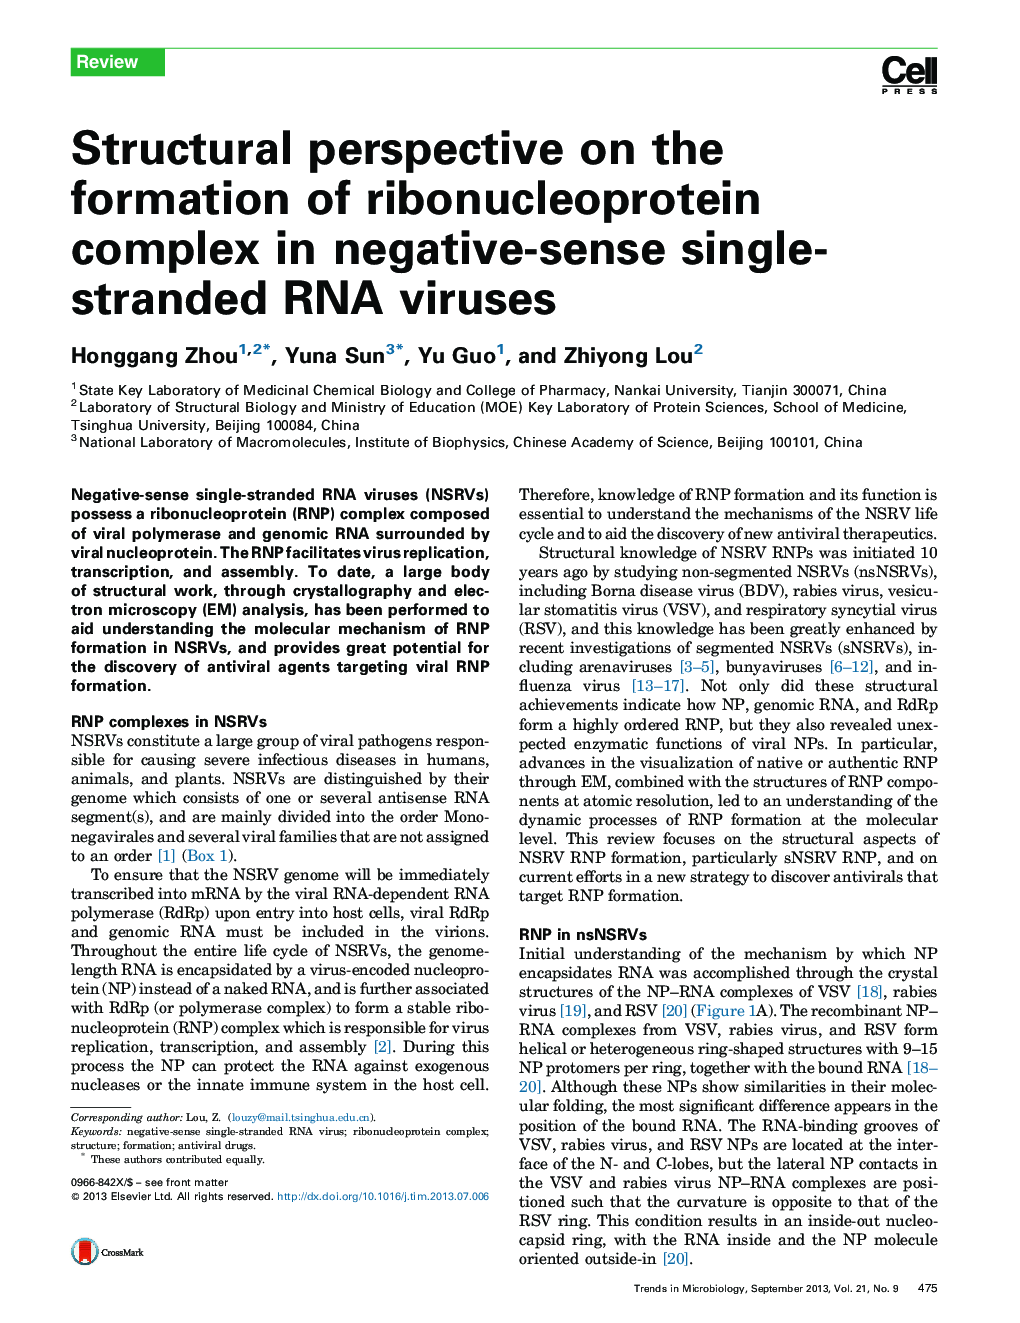 Structural perspective on the formation of ribonucleoprotein complex in negative-sense single-stranded RNA viruses